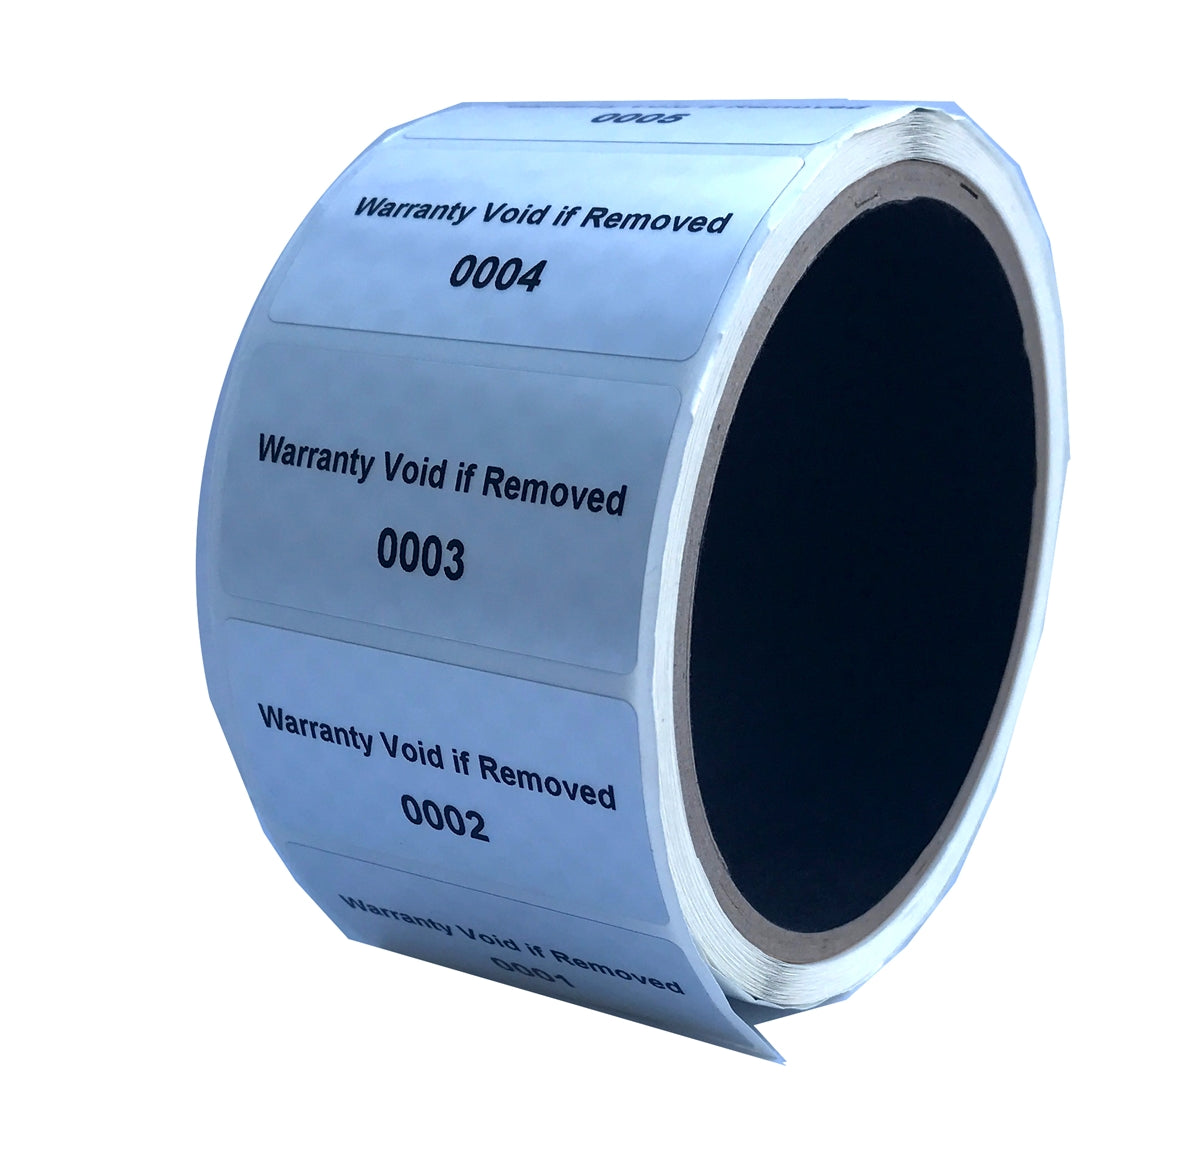 500 Silver Matte TamperVoidPro Metallic Tamper Evident Security Labels Seal Sticker, Rectangle 2" x 1" (51mm x 25mm). Printed: Warranty Void if Label Removed  + Serial Number.